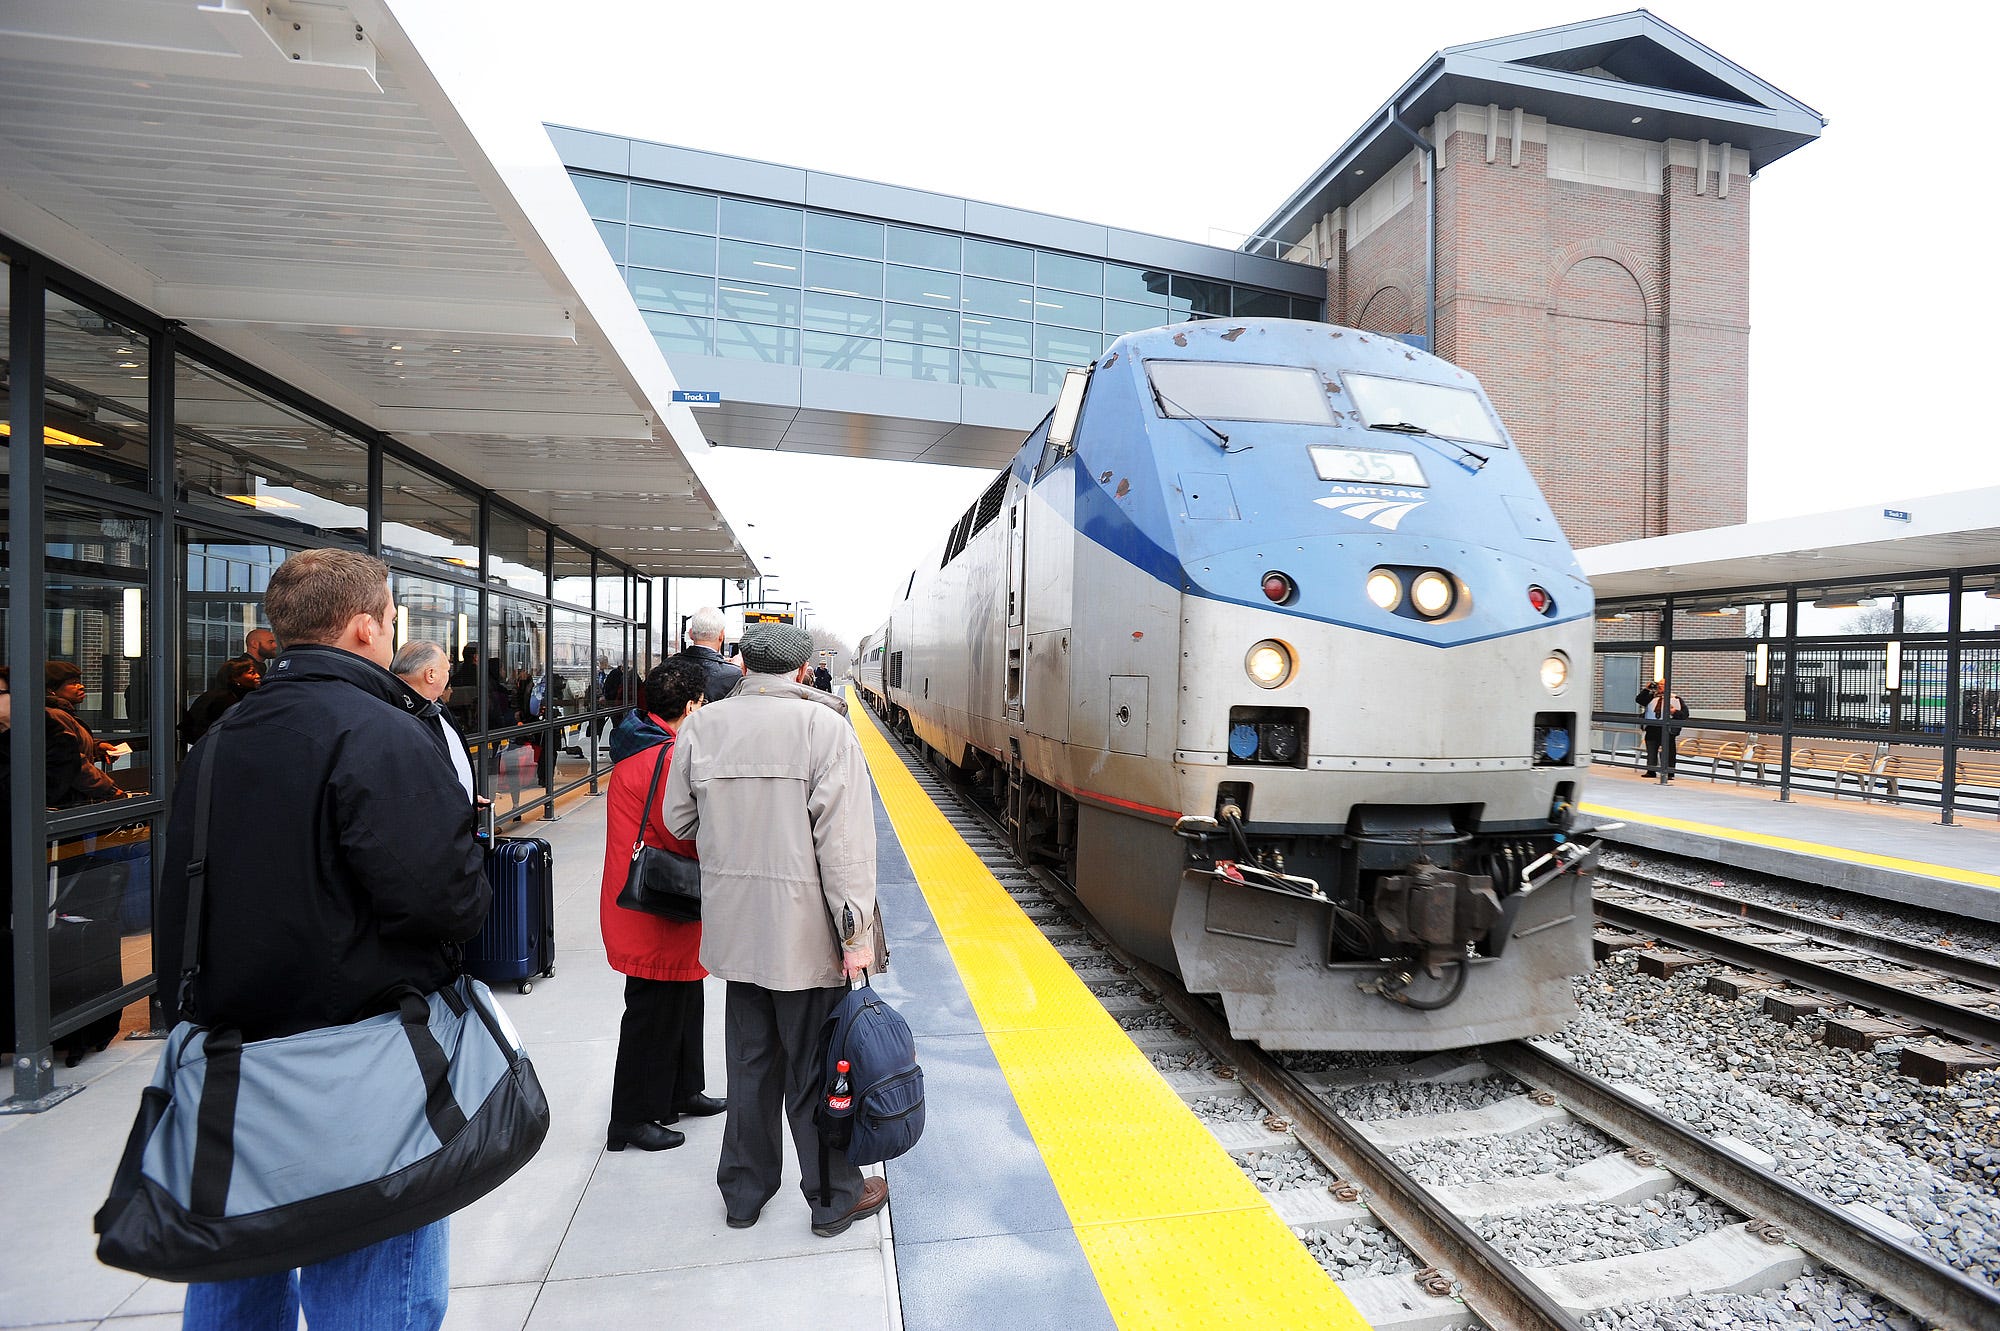 A Chicago bound train arrives after the dedication of the John Dingell Transit Center in Dearborn, December 15, 2014.